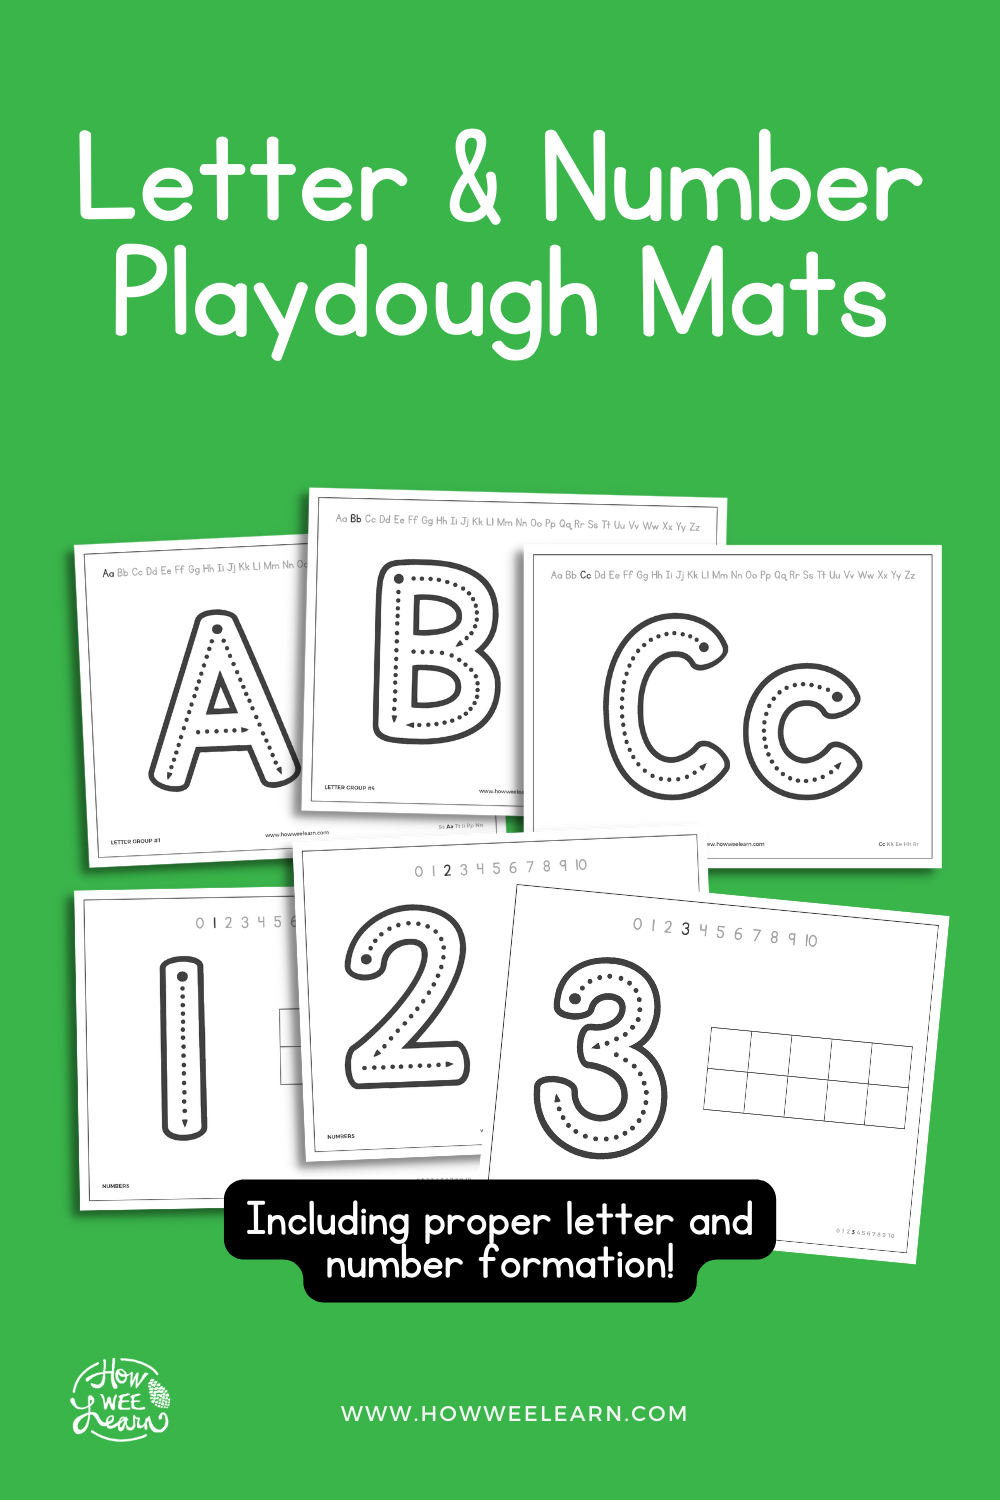 Letter Formation Play-Doh Mat: Letter W Printable (Color